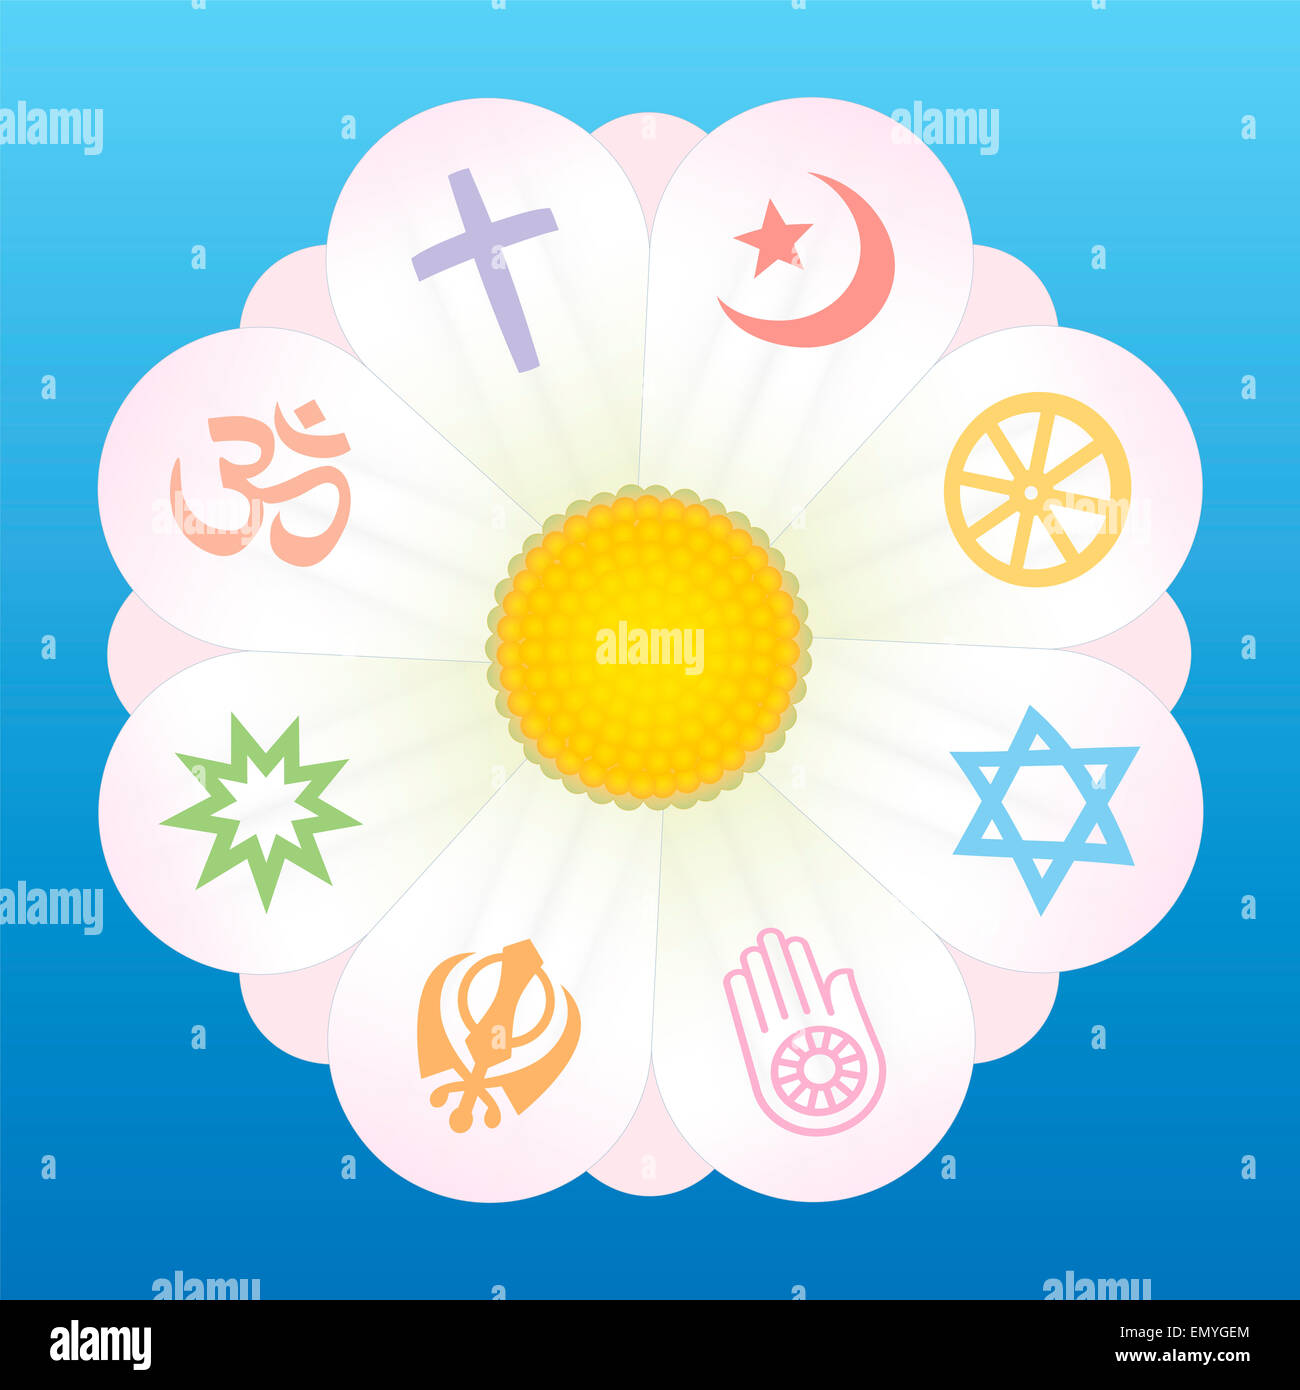 World religion symbols on petals of a flower as a symbol for religious solidarity and coherence. Stock Photo